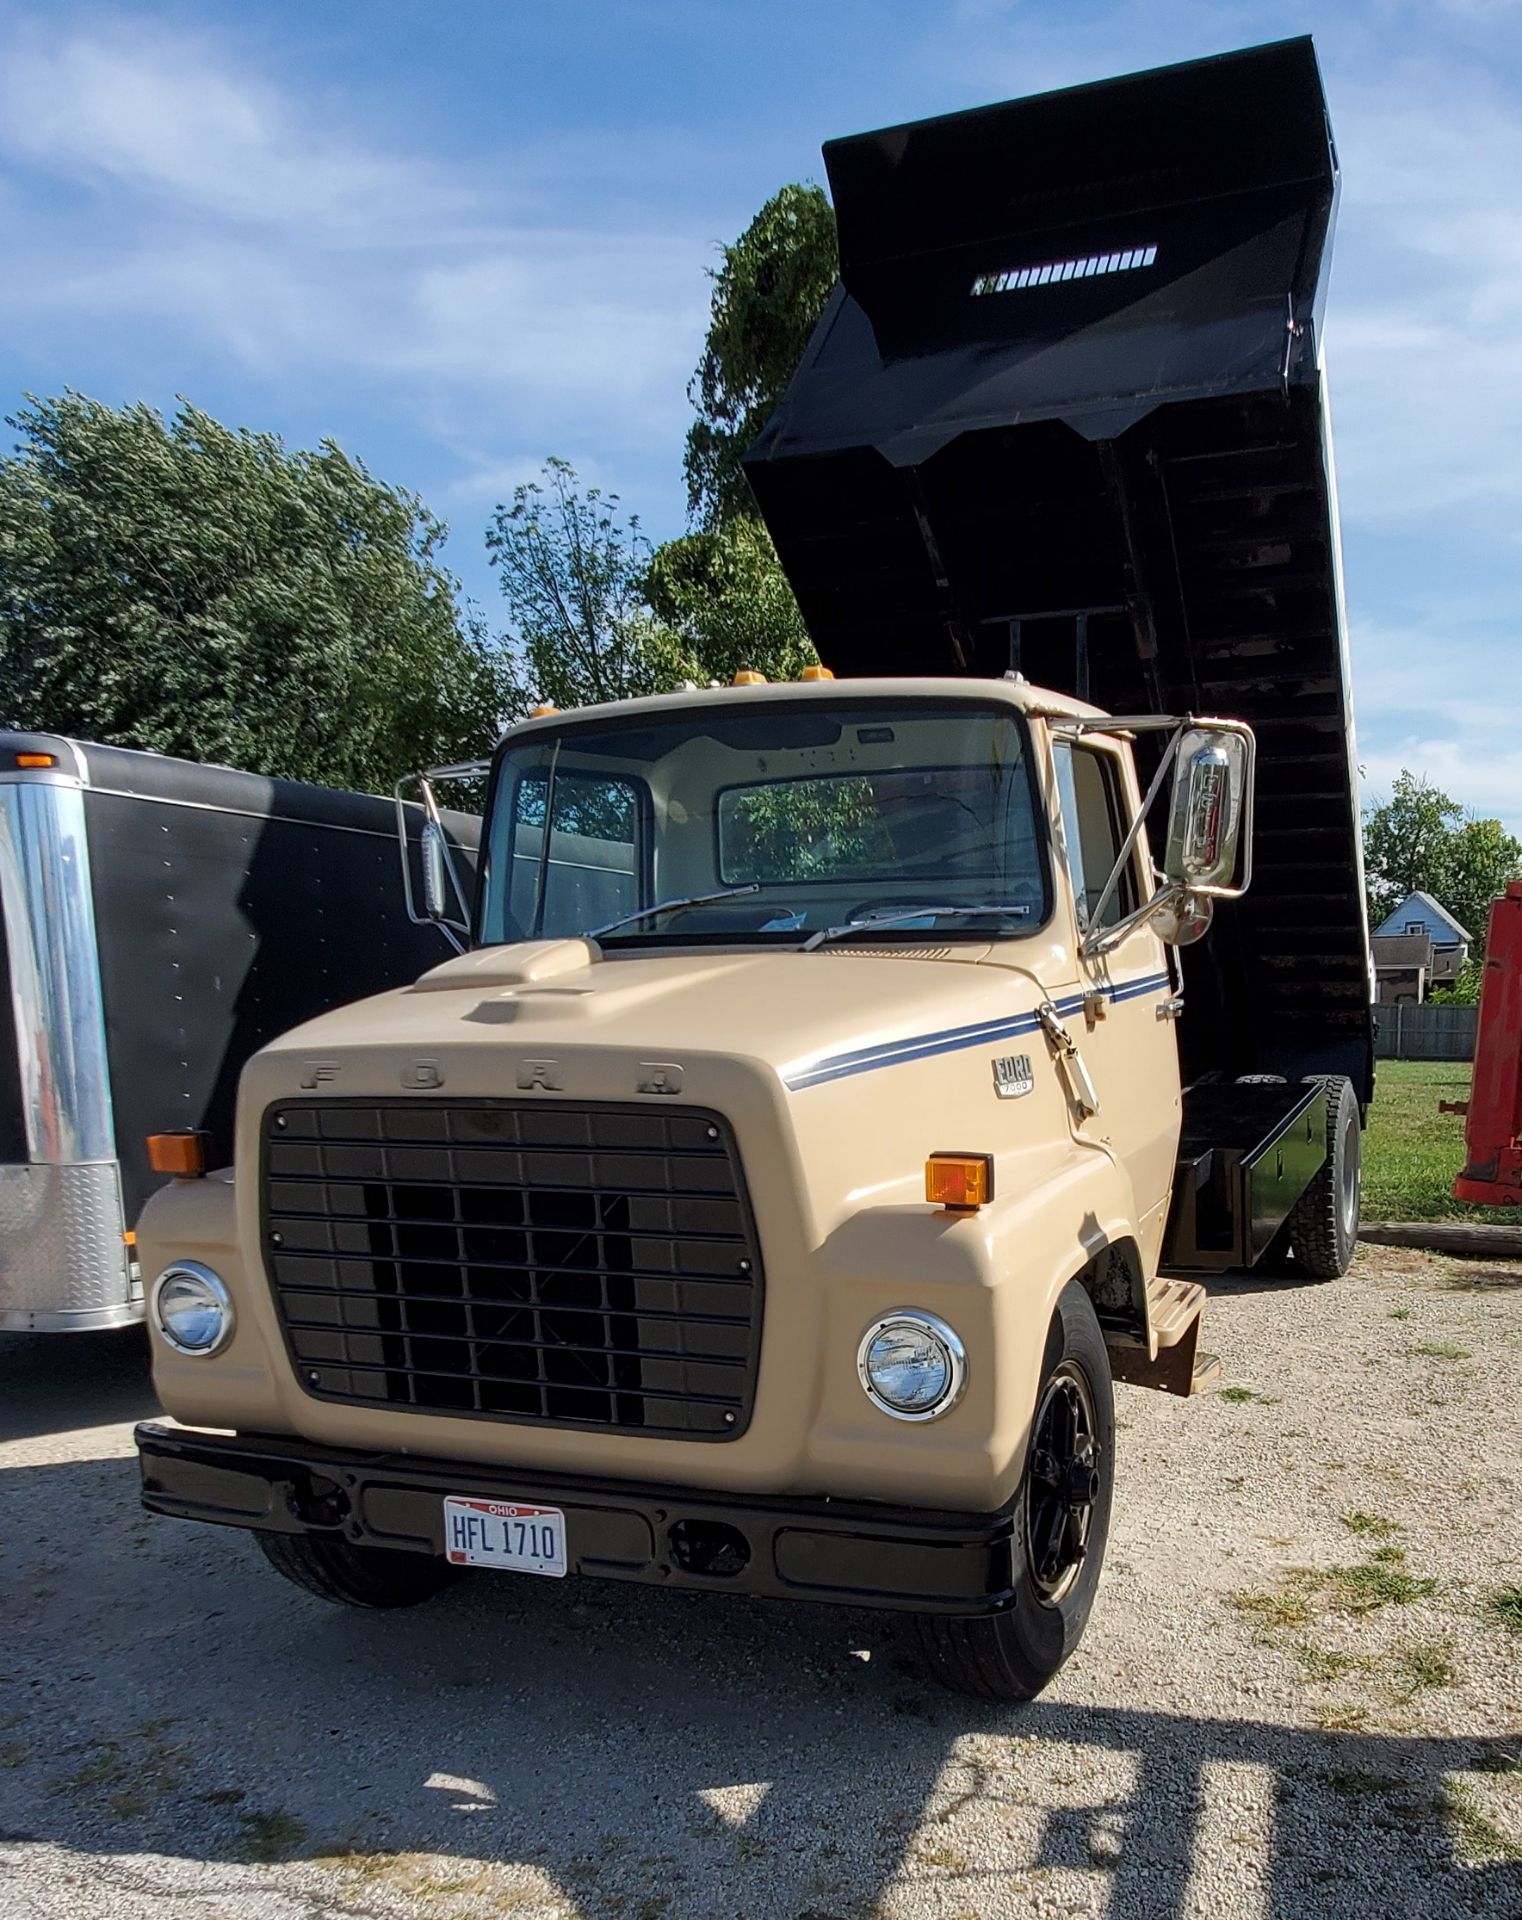 1983 Ford 7000, 5-speed Manual Transmission, Caterpillar 3208 Diesel, 14" Dump Bed,UR 225 Tires, New - Image 16 of 25